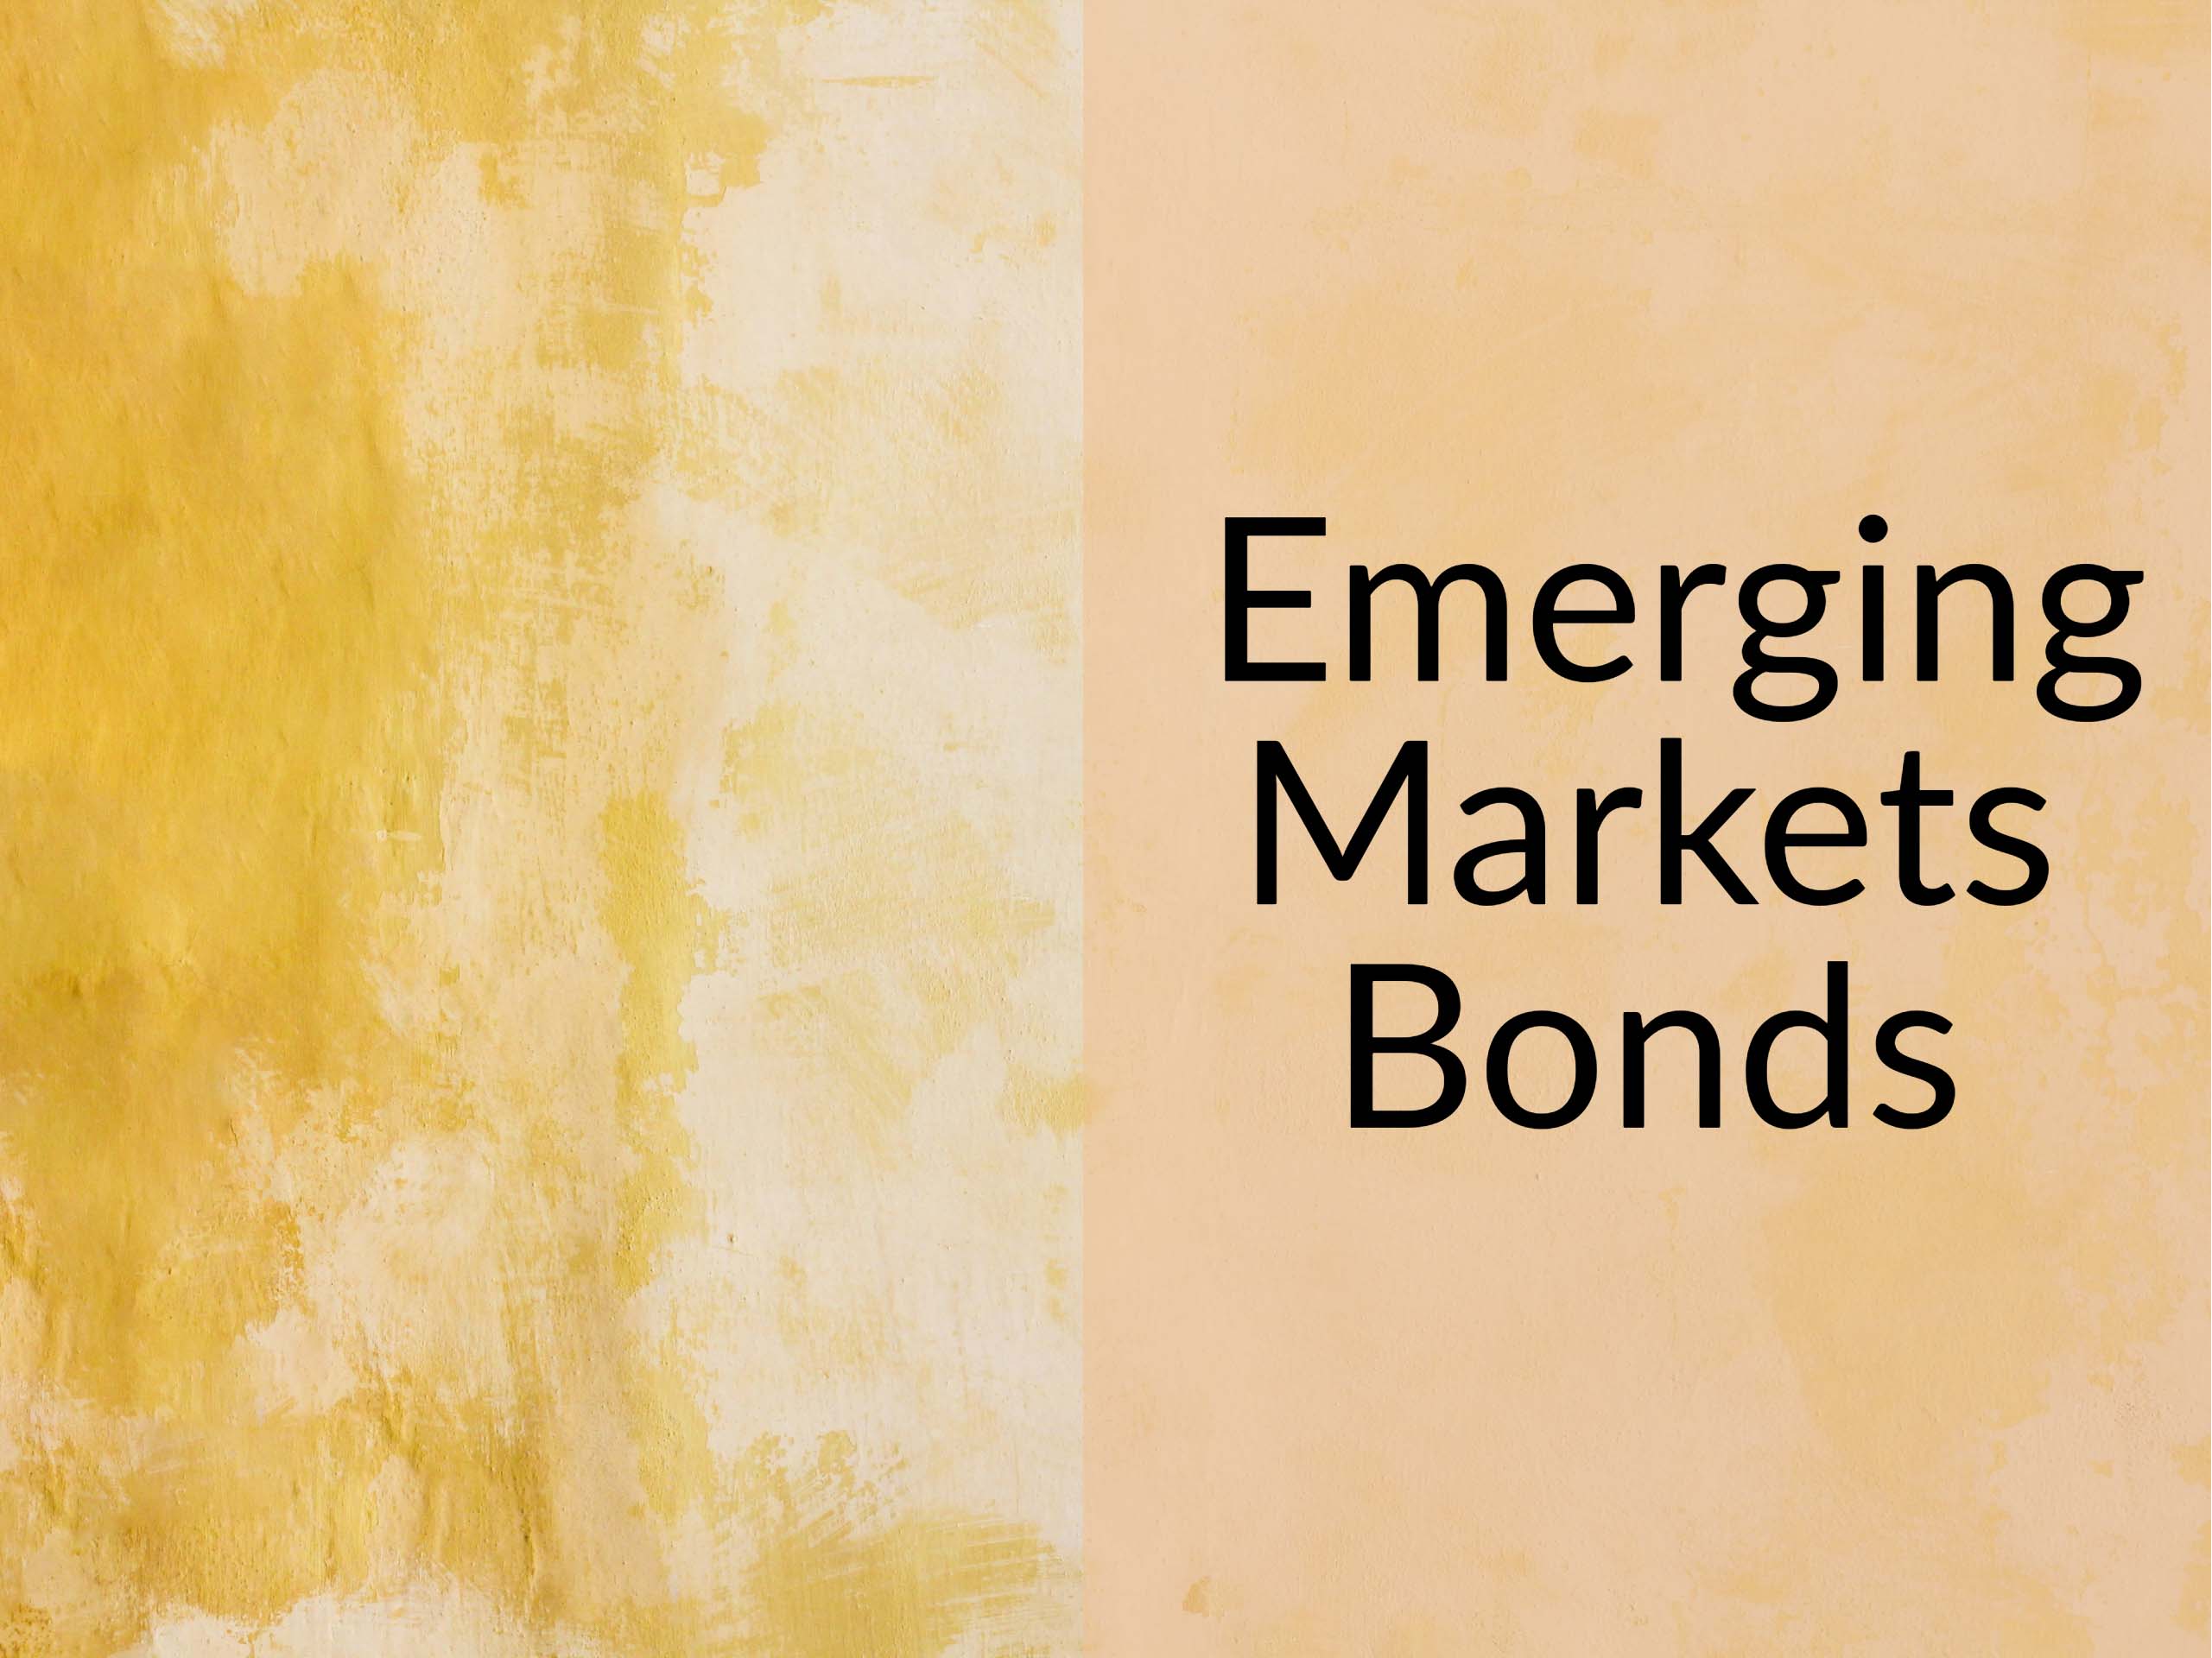 Yellow stucco wall and purple flowers. Caption says "Emerging Market Bonds"